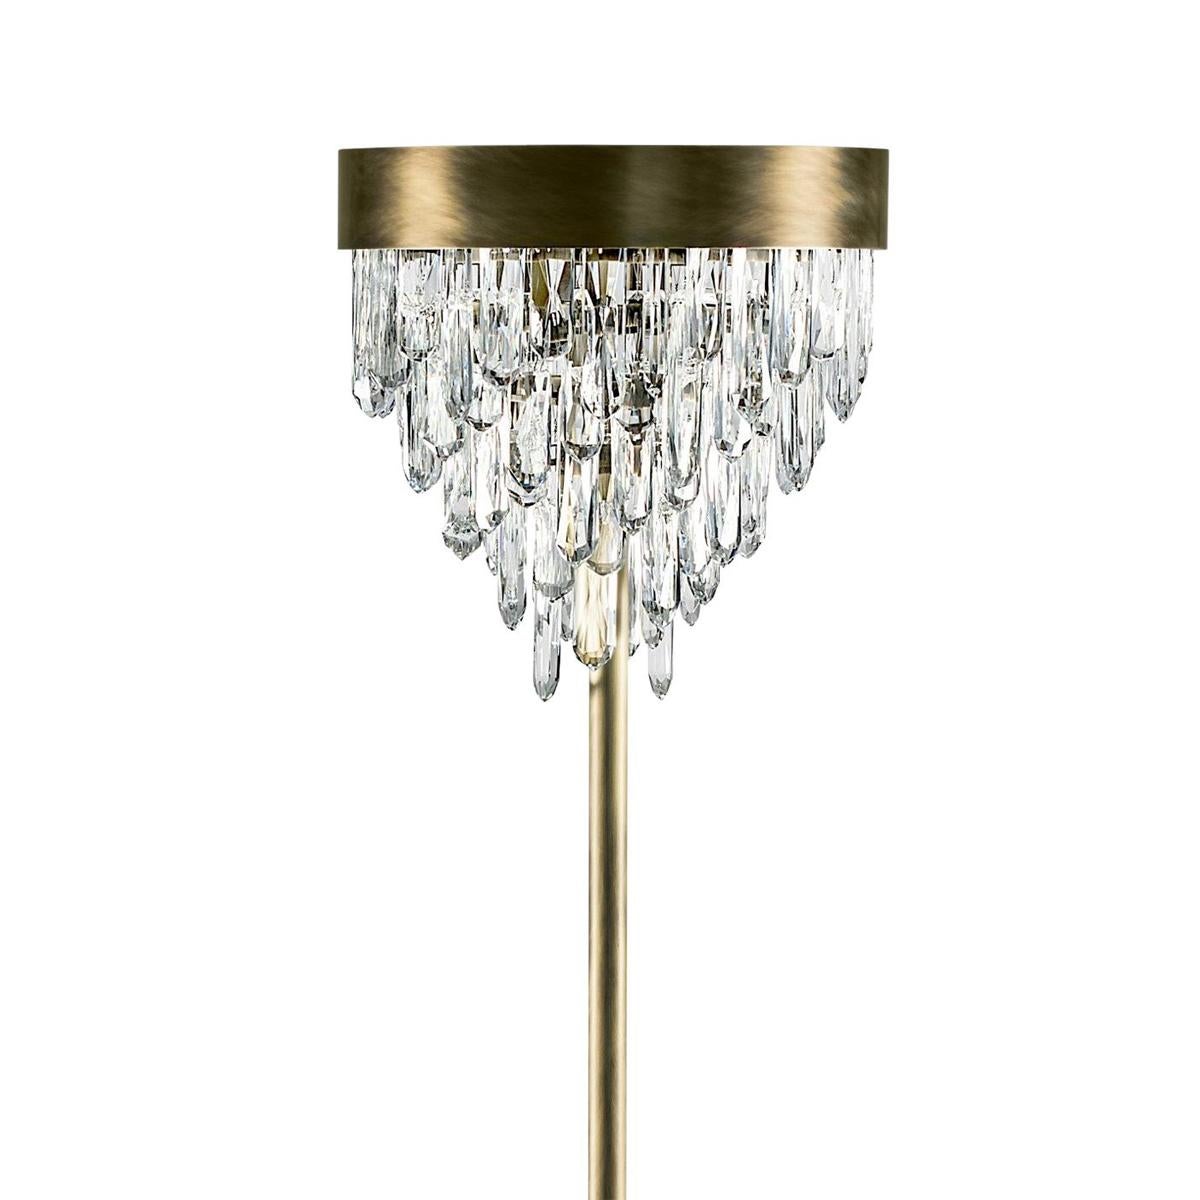 Floor lamp crystal sticks with carved quartz crystal
sticks. Structure in solid brass in antique brushed finish.
With led light included inside the ring structure.
 